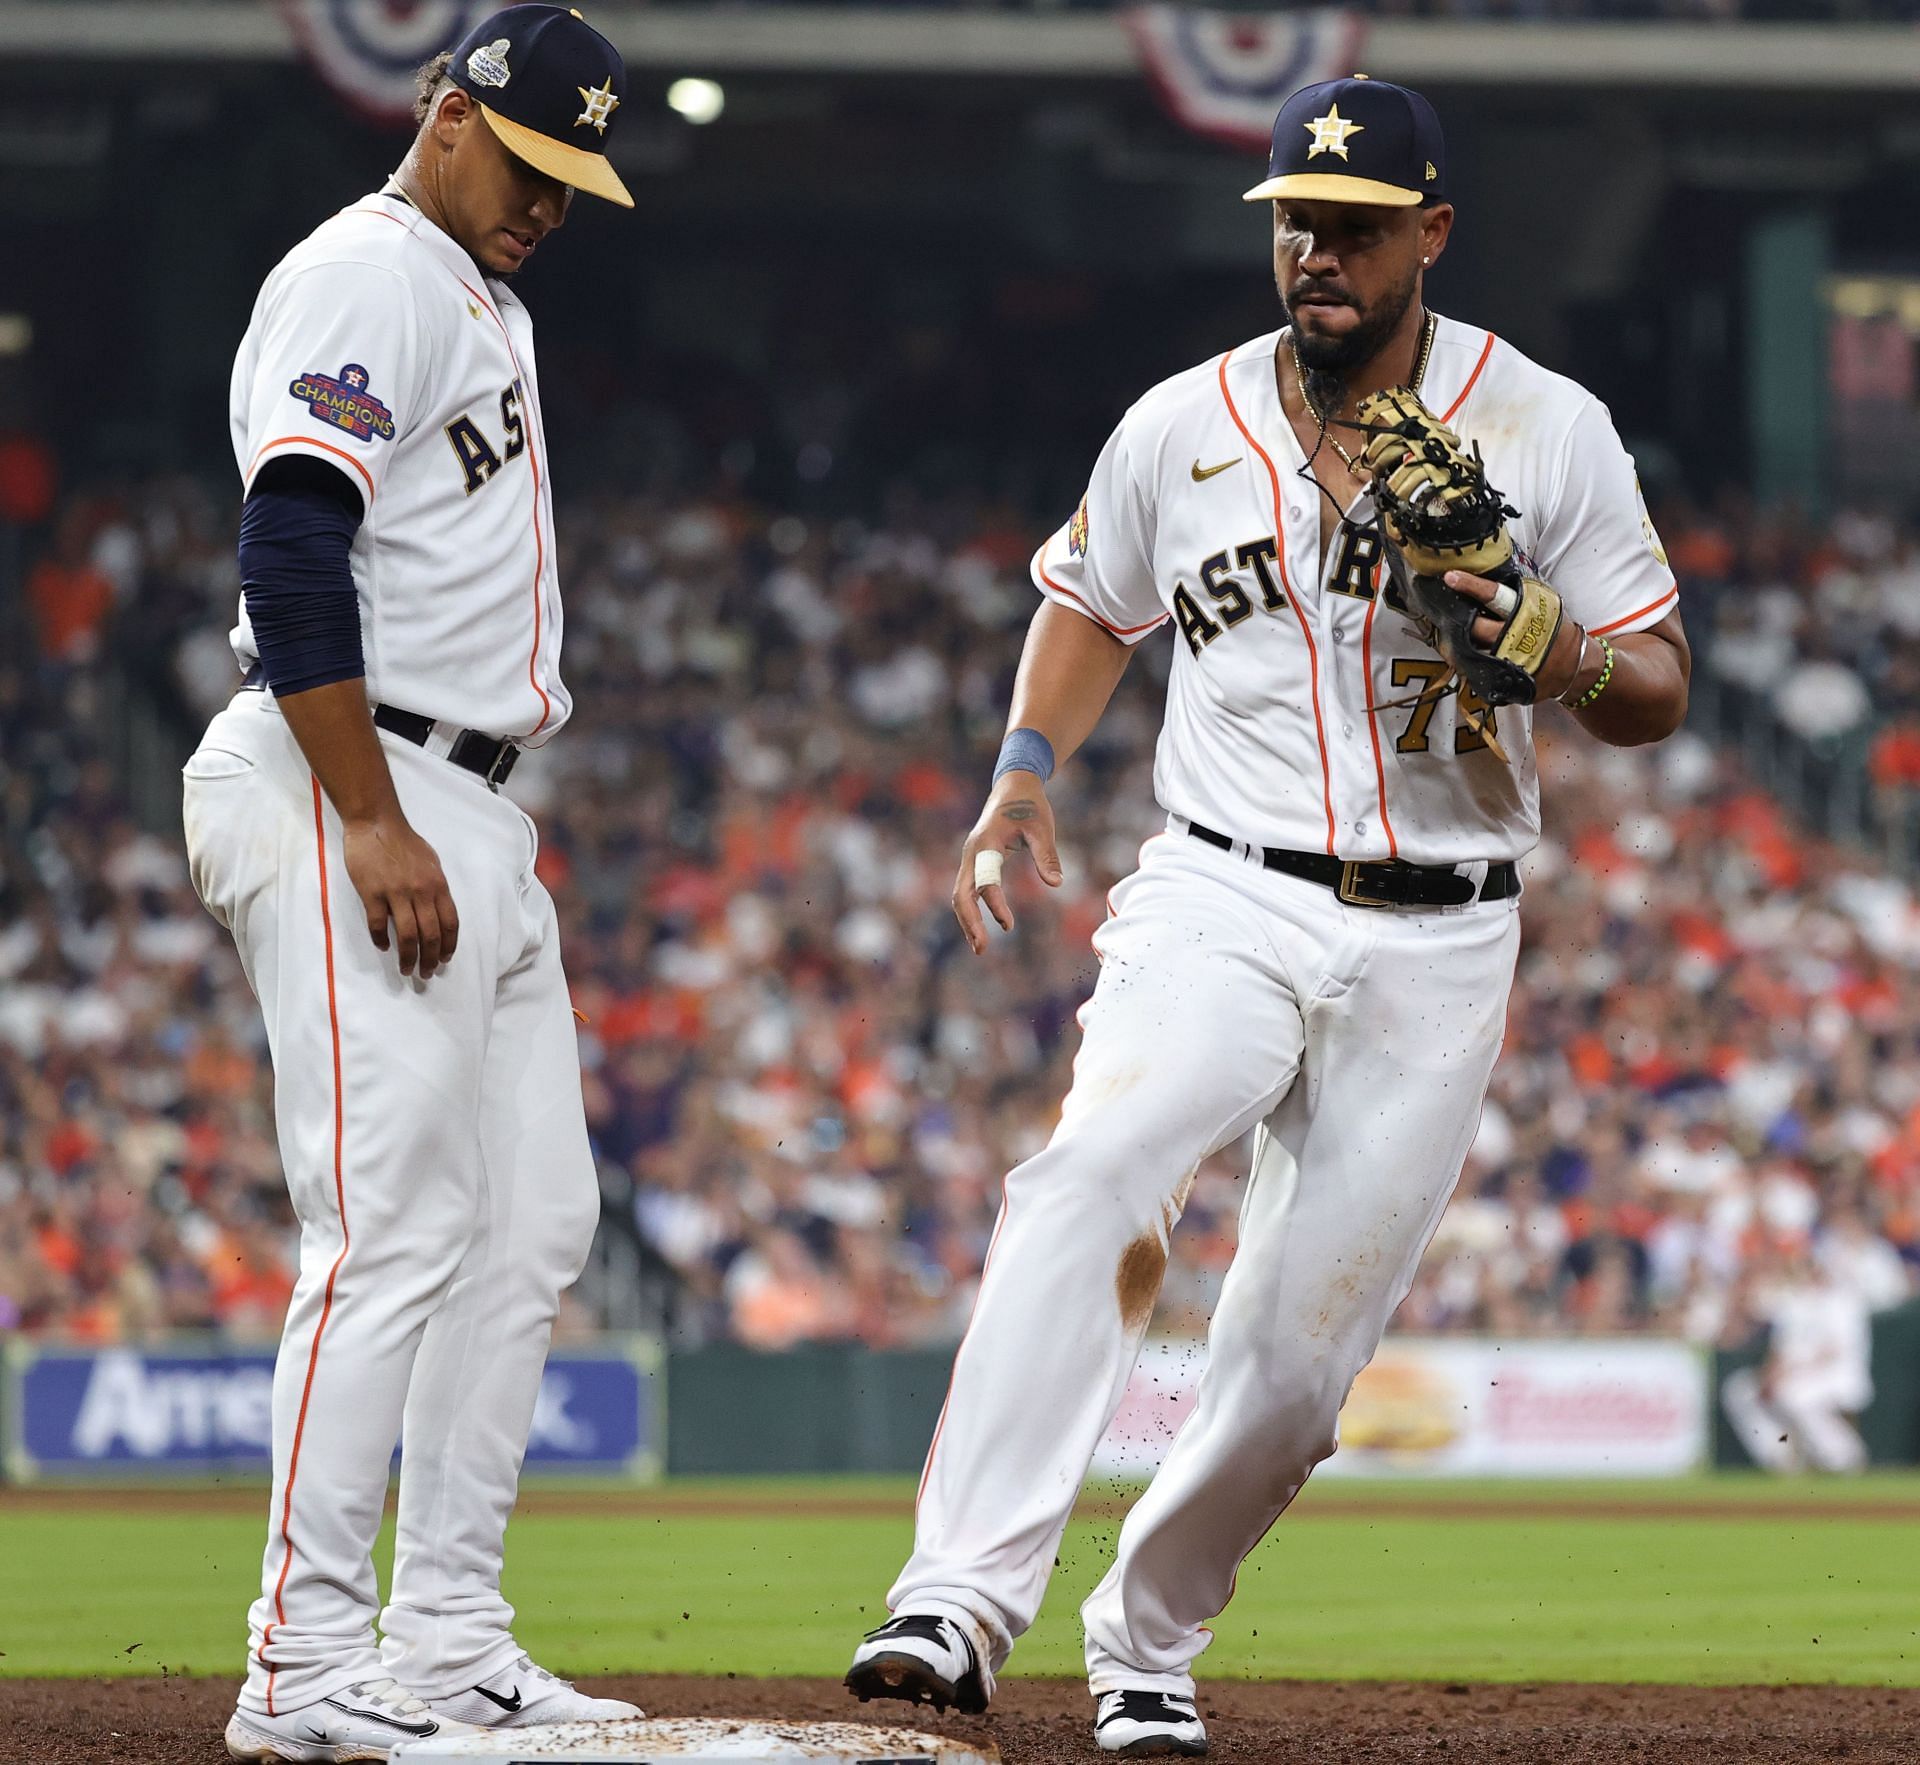 Houston Astros fans upset after 10year Opening Day win streak snapped